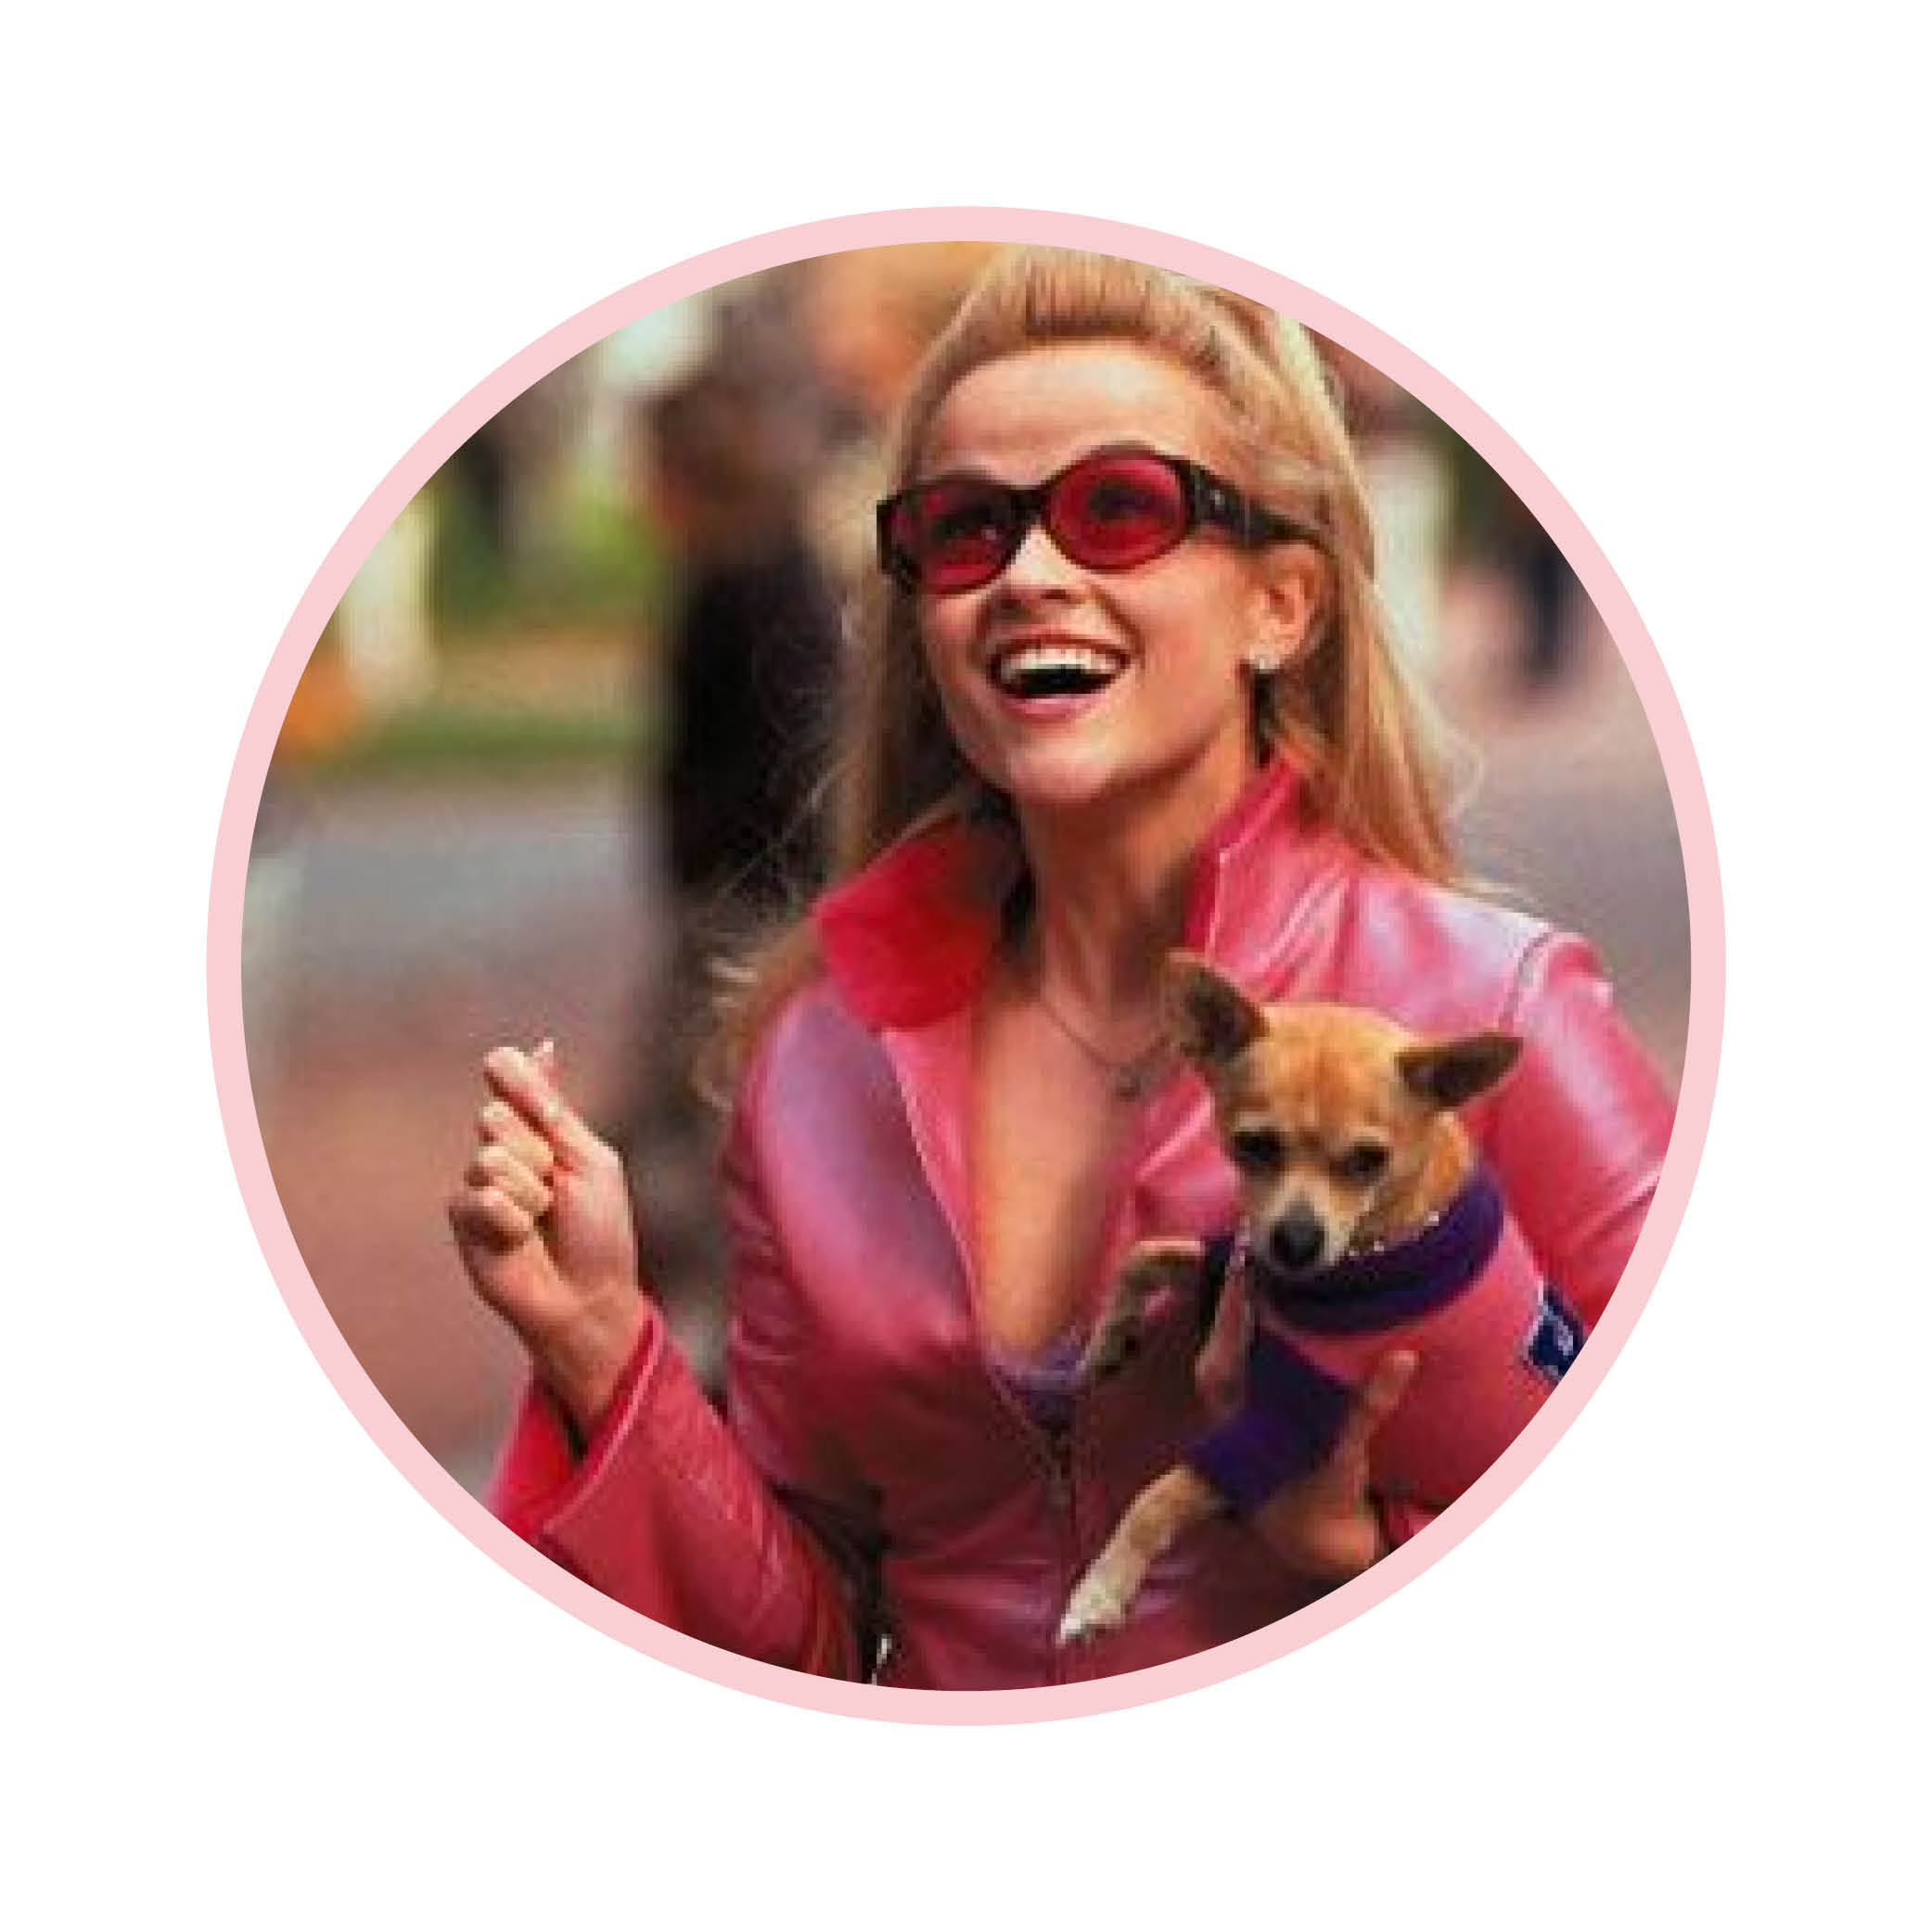 Legally Blonde (2001) The early noughties classic that propelled Reese Witherspoon to mega-stardom is a flick that somehow never gets old.